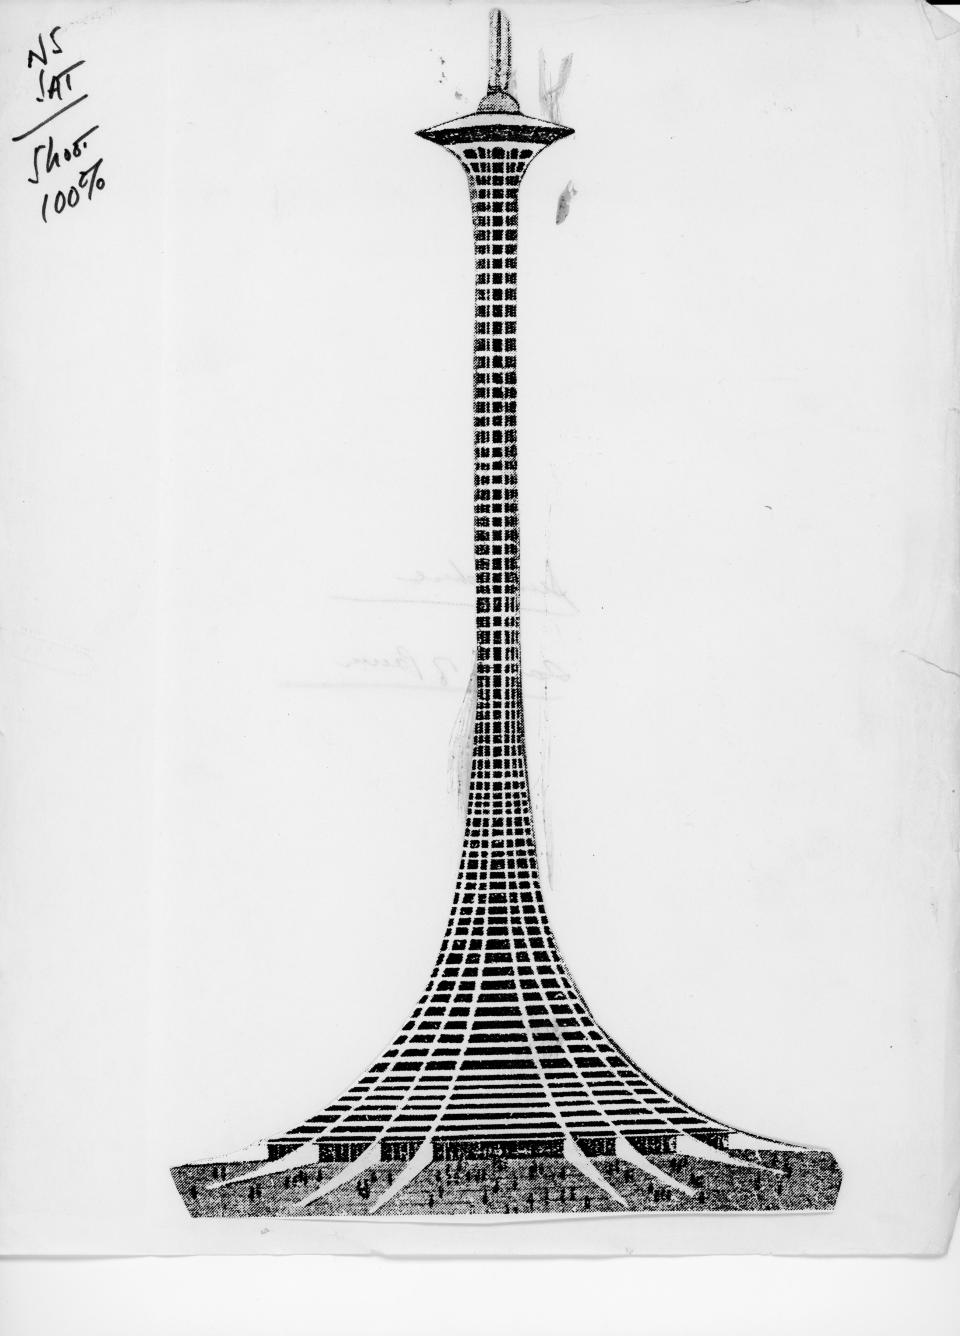 Sevierville architect Marc Cardoso sued World's Fair officials after the 1982 event in Knoxville, claiming they stole his design for the Sunsphere. But his 500-foot Tower of Power looks more like a Space Needle than a Sunsphere, and a judge ruled against him.